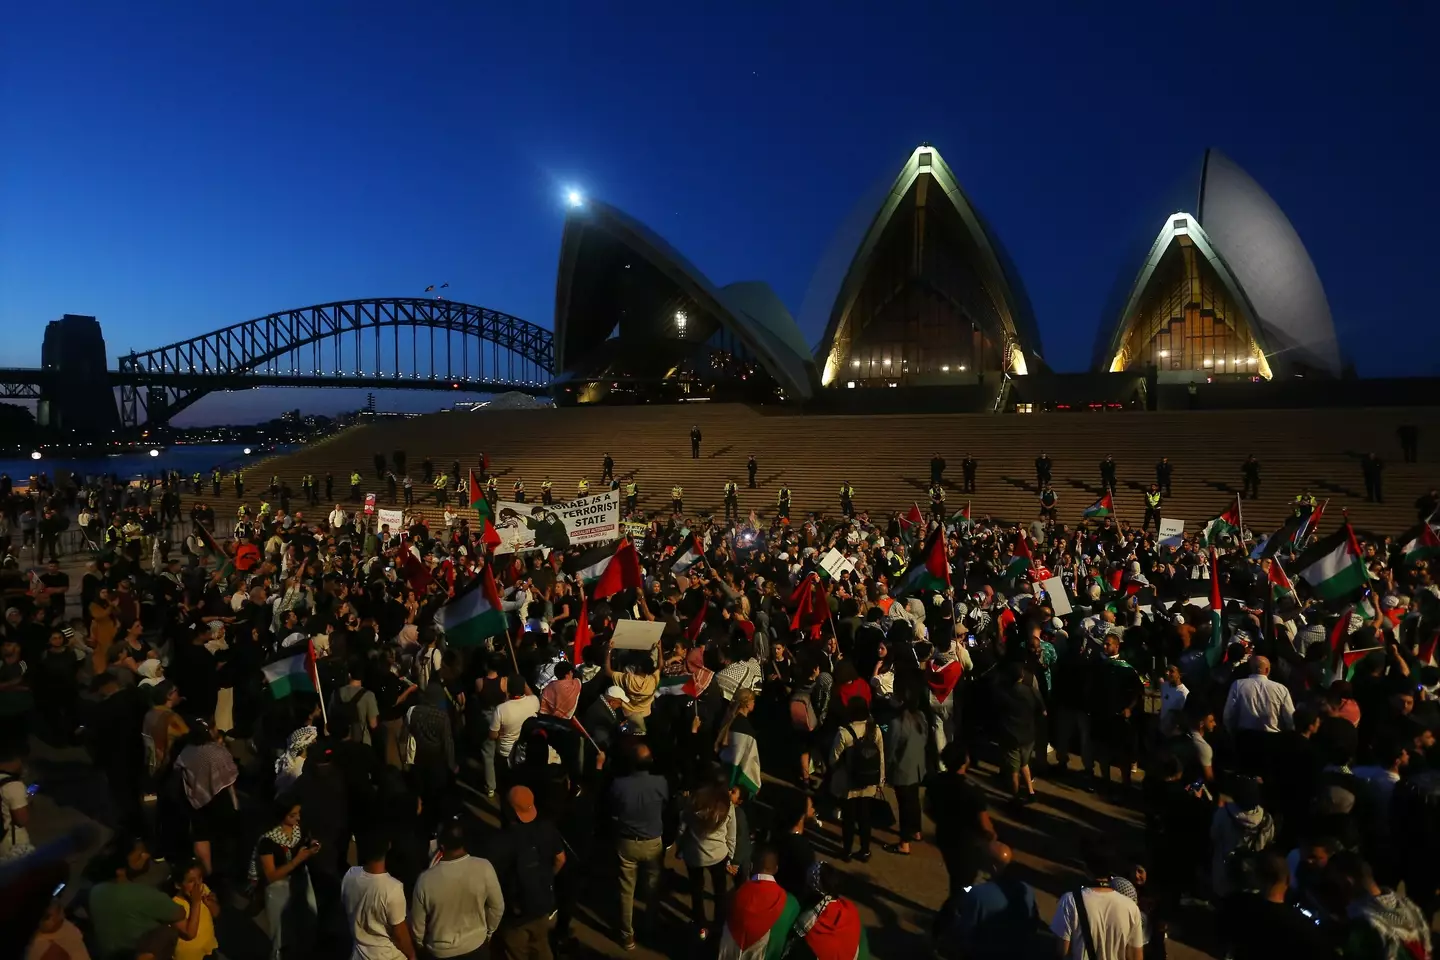 Hundreds gathered on the steps of the Opera House this week.